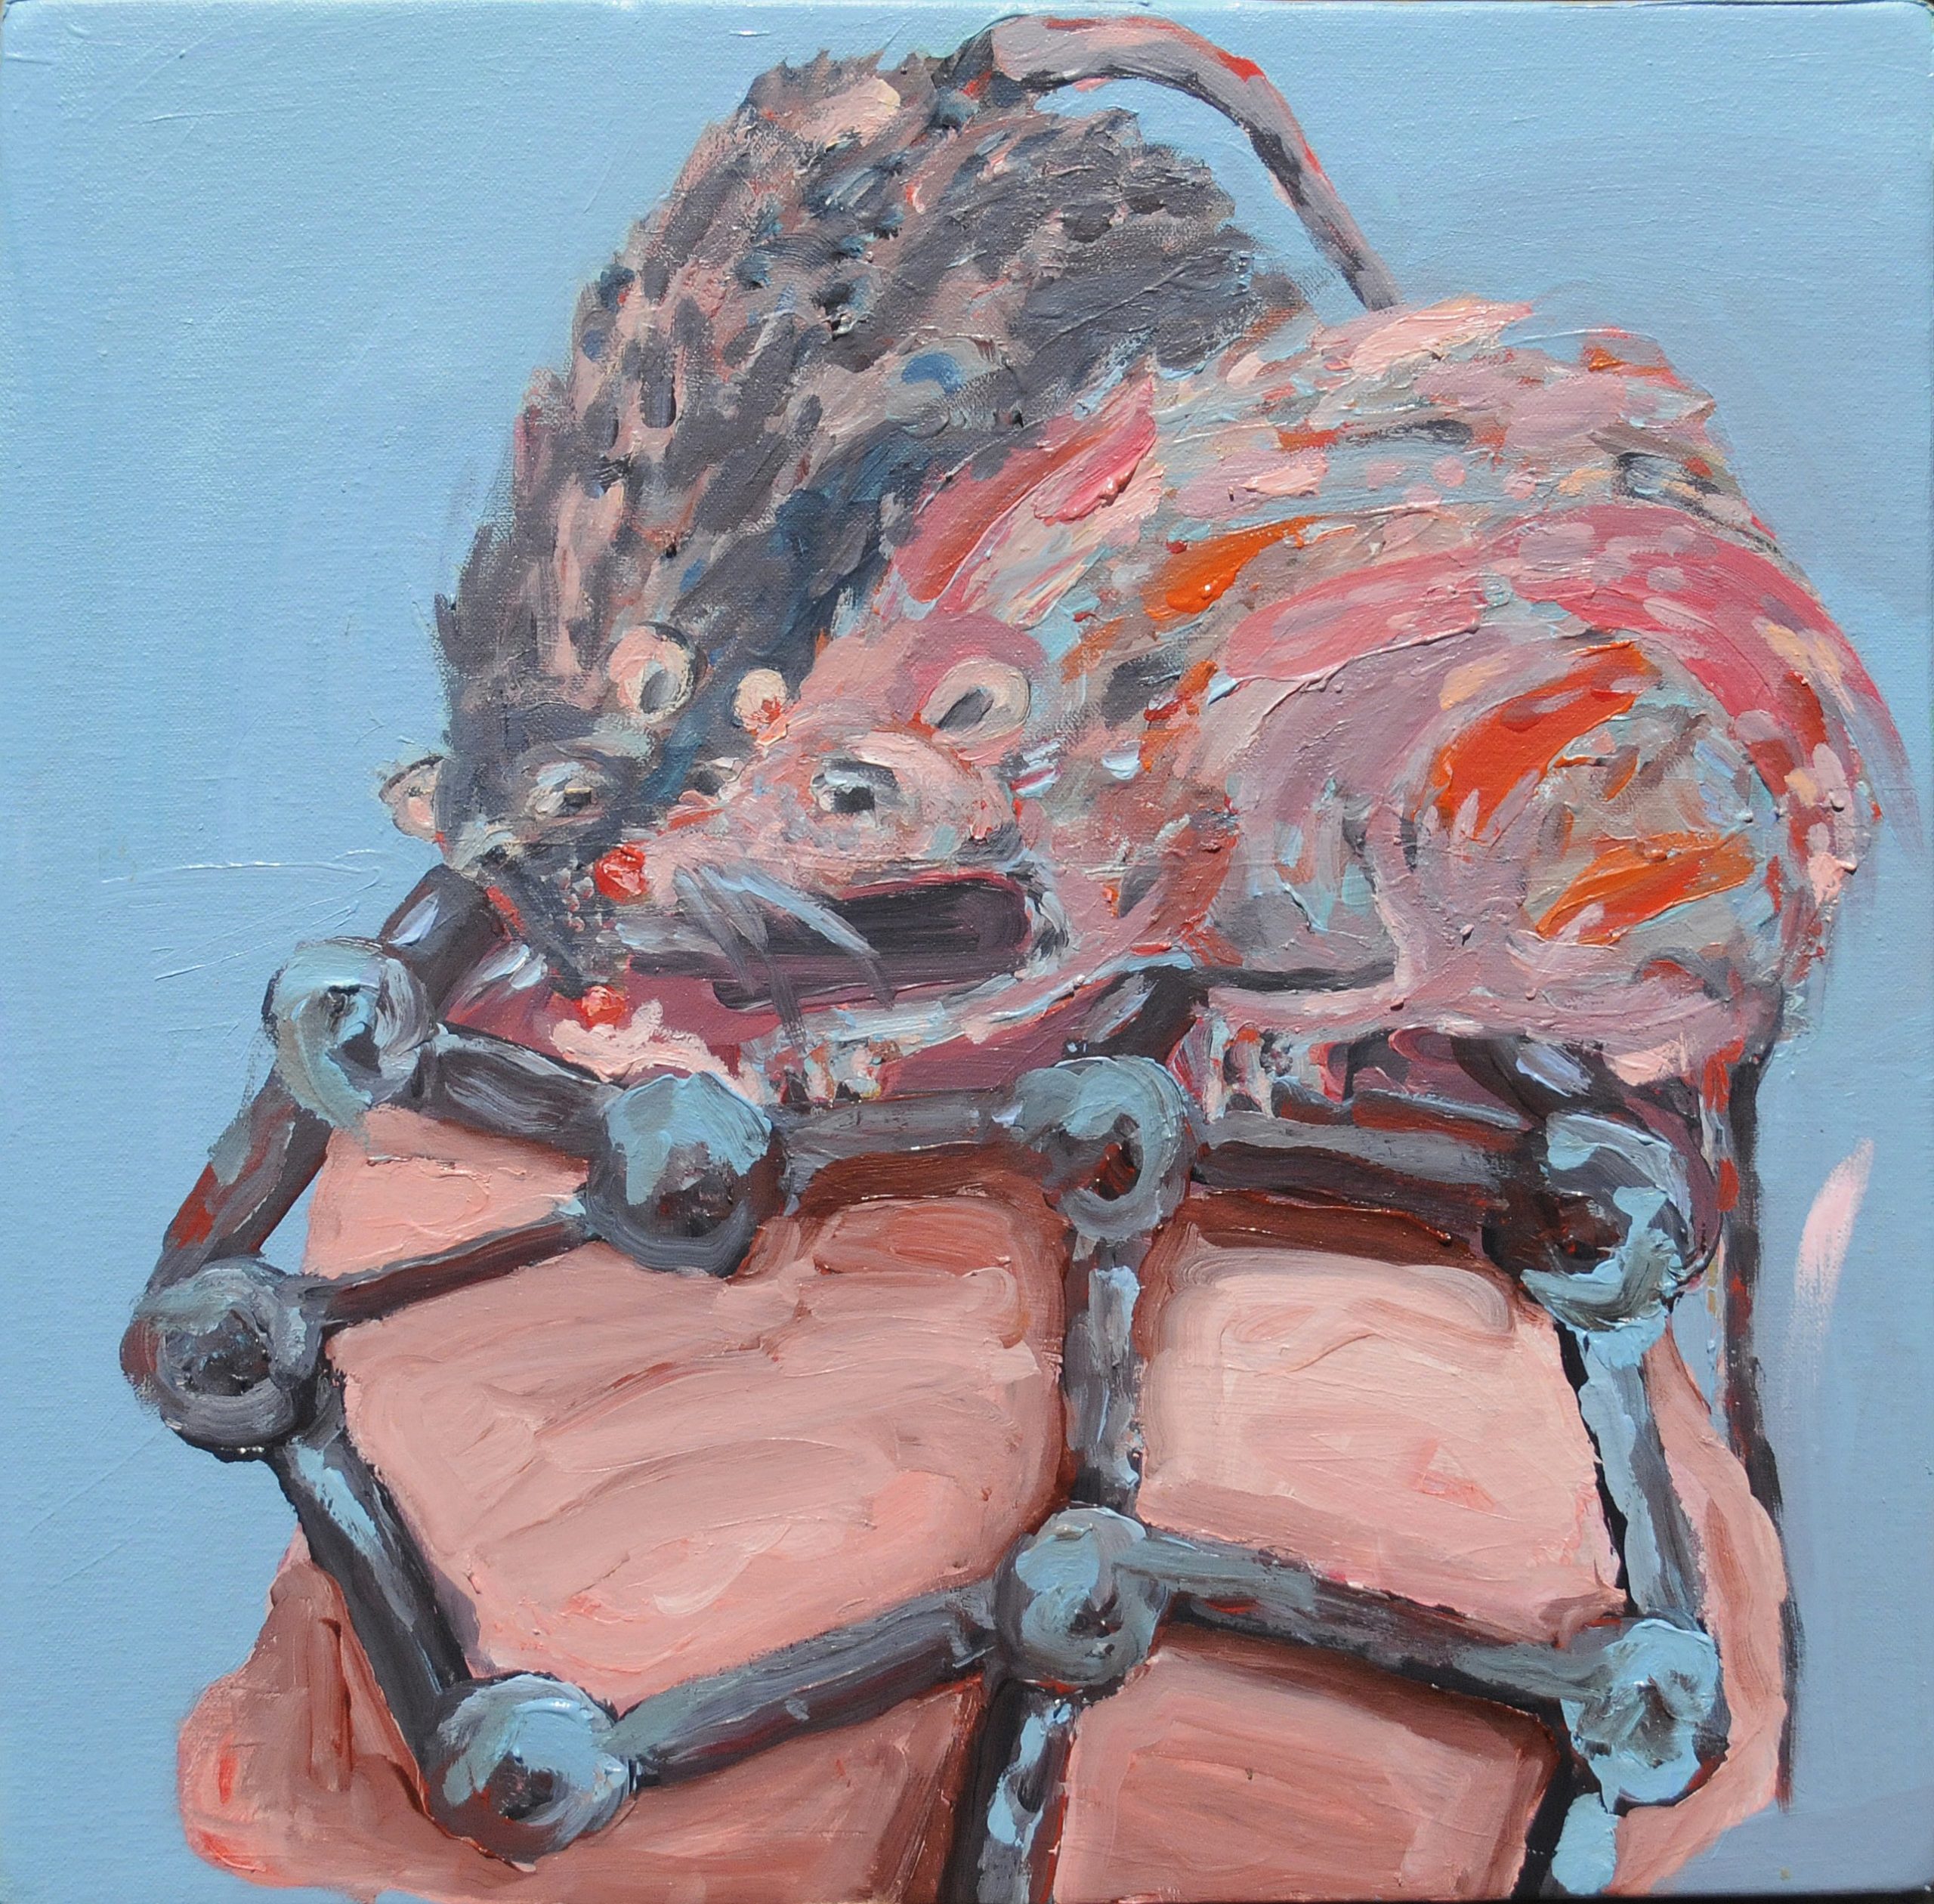 Genevieve Carroll 'Monument Two' oil on canvas 40 x 40cm $1,800